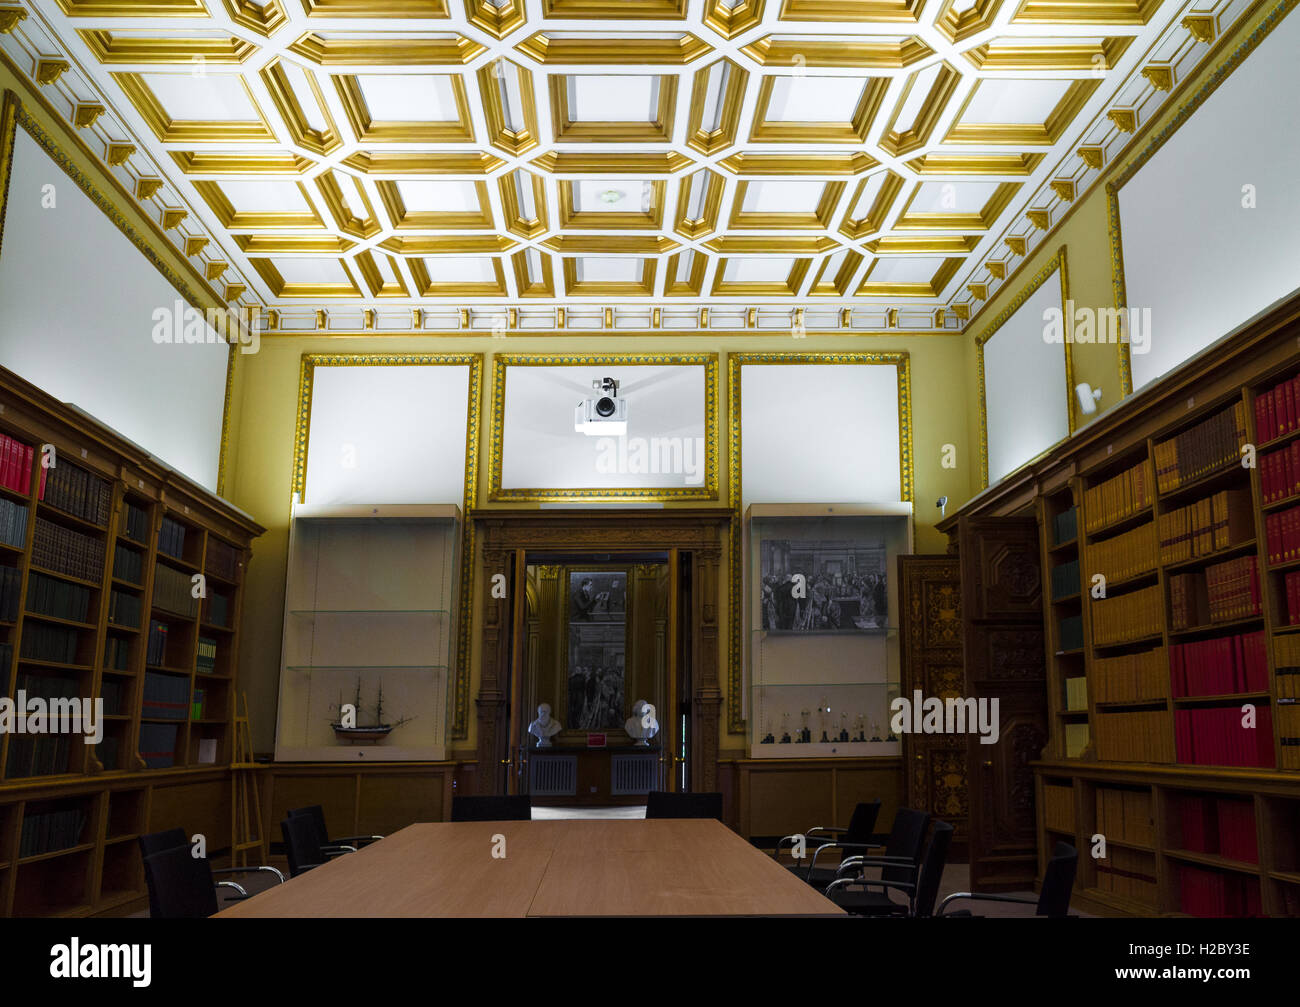 Ceiling of the Wolfson library 2 at the Royal Society, London, England. Stock Photo